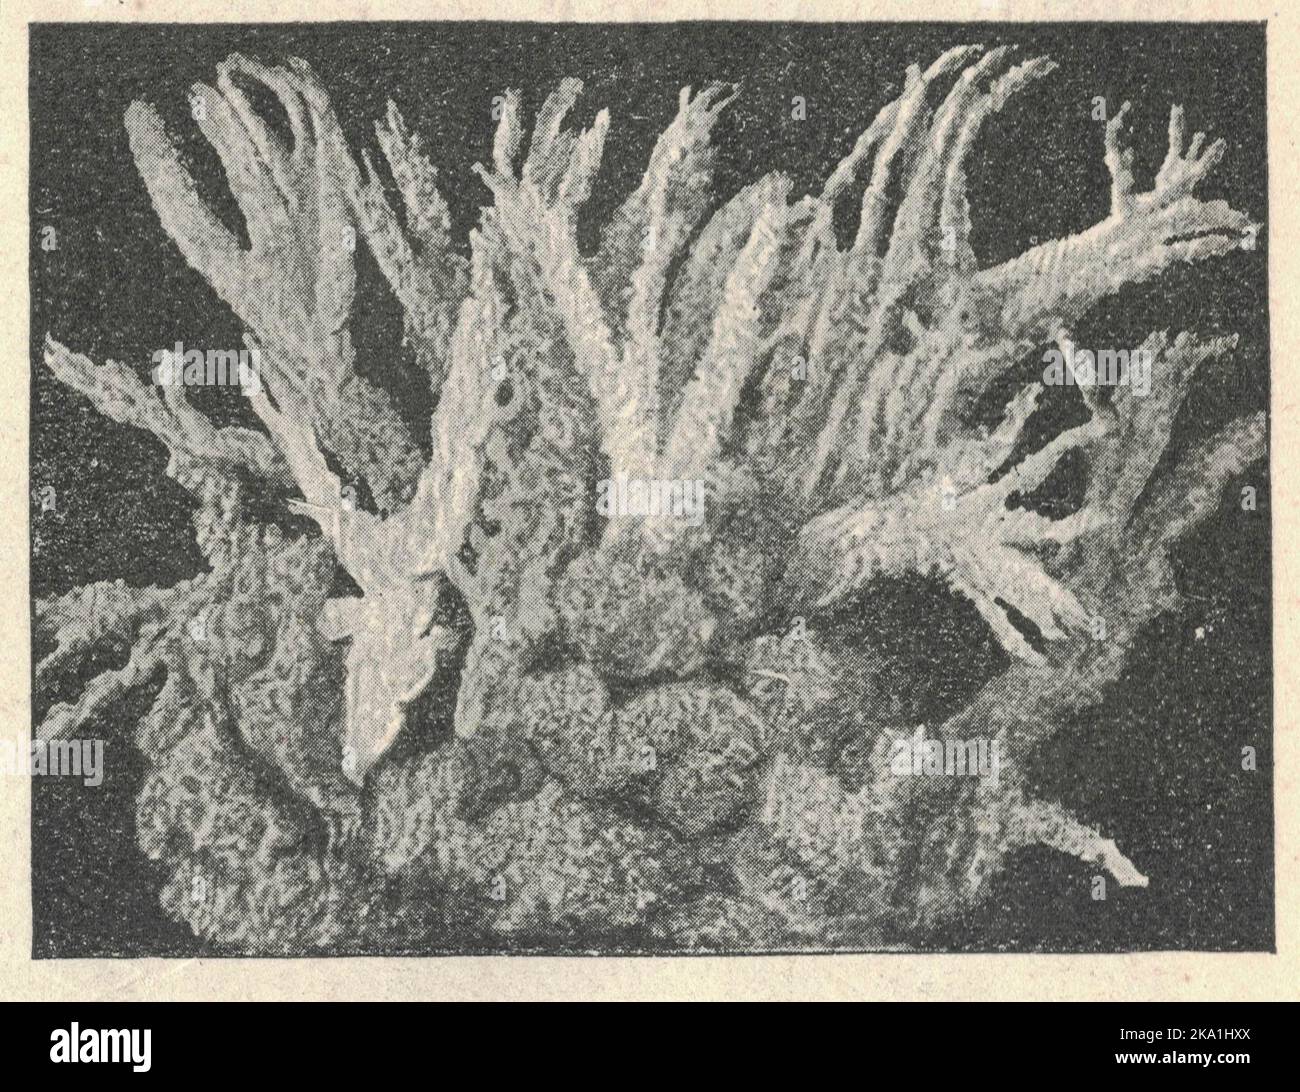 Symbiosis of  Spongilla lacustris on top with Plumatella fungosa (underneath). Book illustration published 1907. Spongilla lacustris is a species of freshwater sponge from the family Spongillidae. It inhabits freshwater rivers and lakes, often growing under logs or rocks. Lacustris is a Latin word meaning 'related to or associated with lakes'. The species ranges from North America to Europe and Asia. It is the most common freshwater sponge in central Europe. It is the most widespread sponge in Northern Britain, and is one of the most common species of sponges in lakes and canals. Spongilla lac Stock Photo